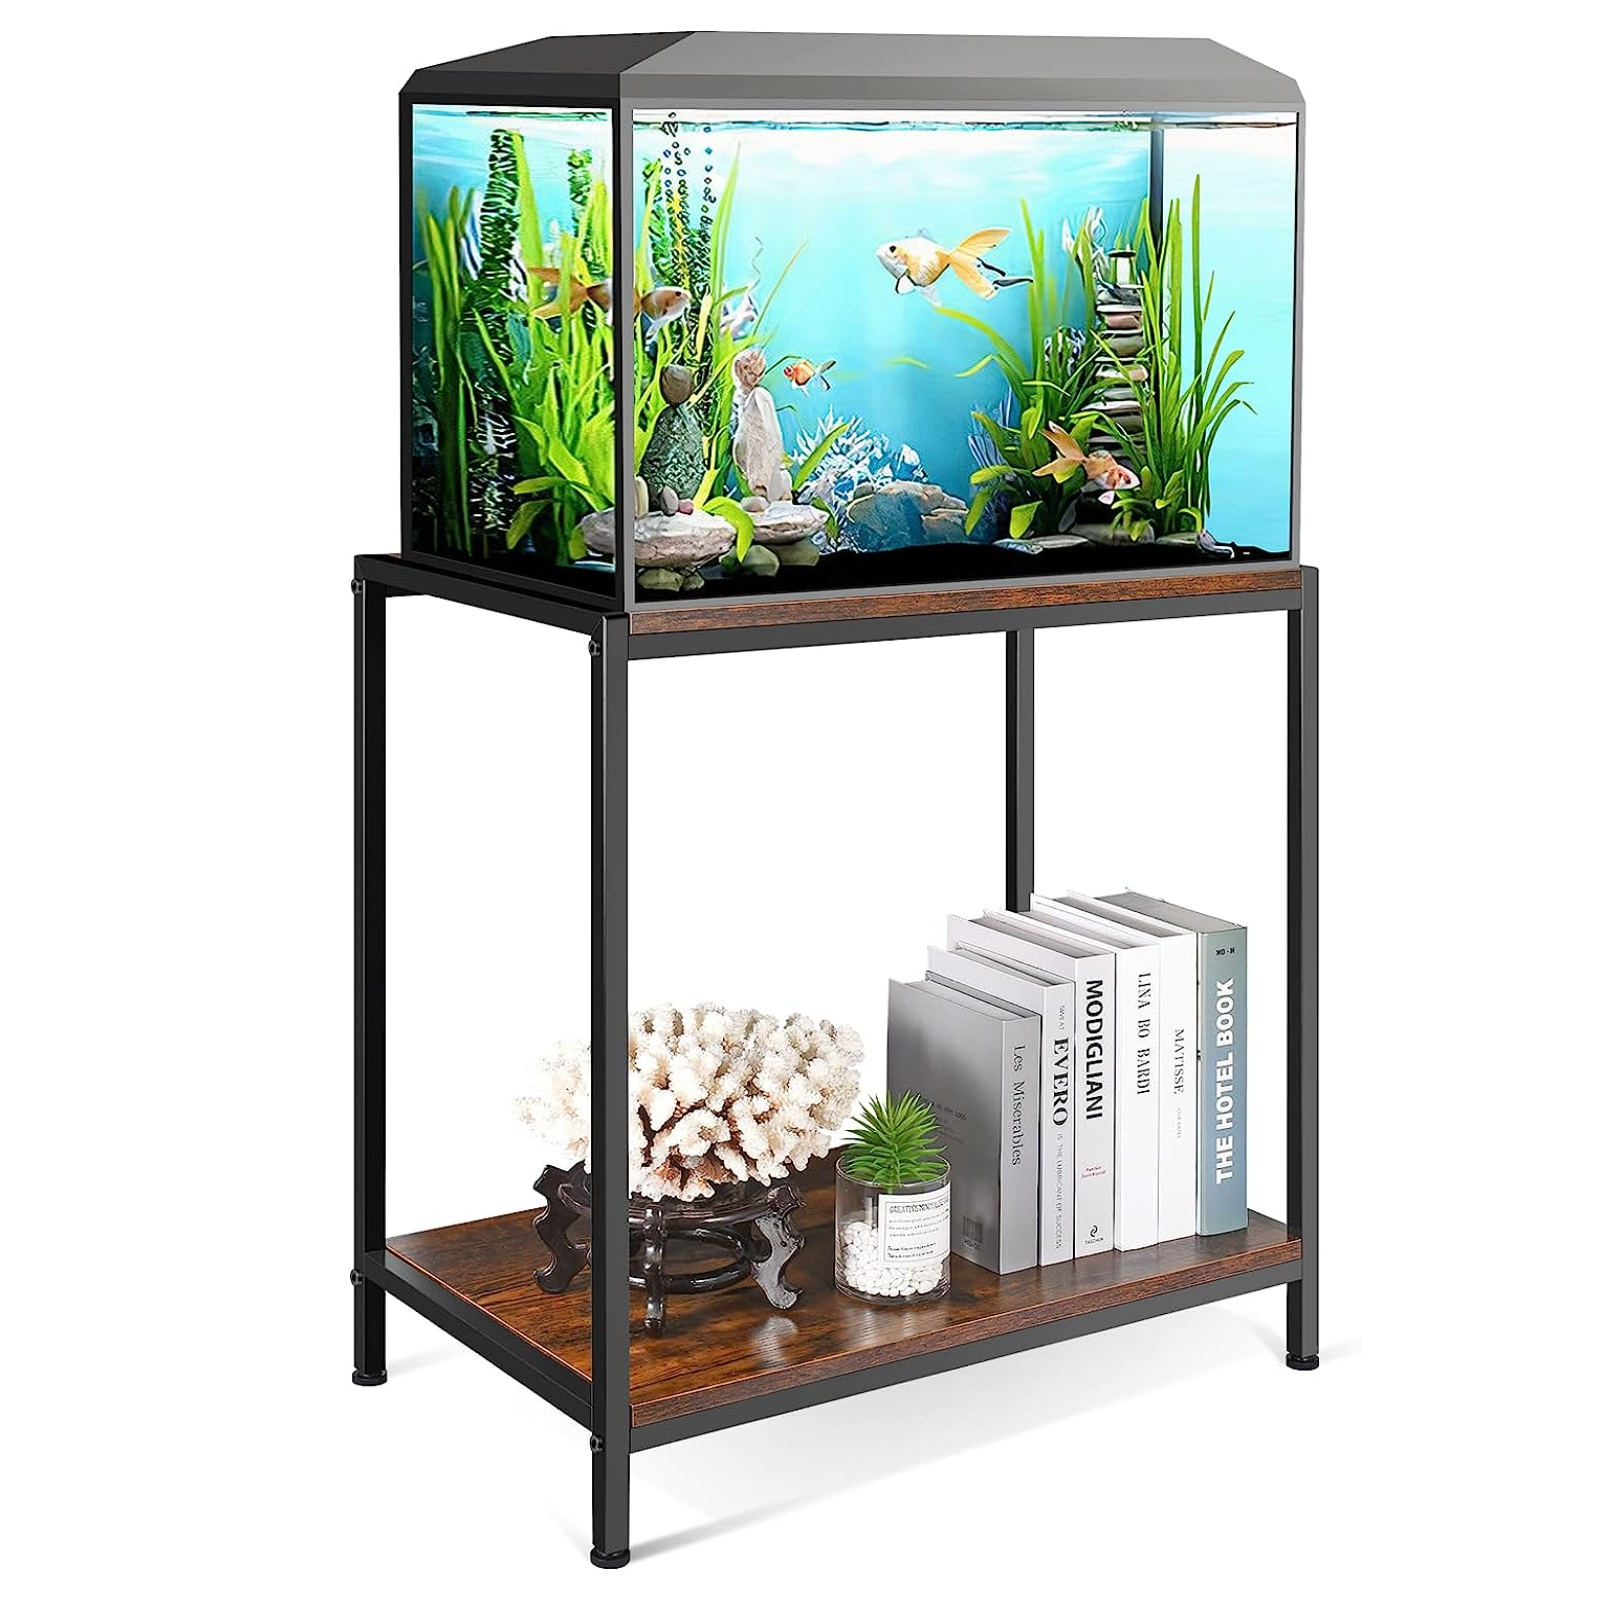 GADFISH Fish Tank Stand for up to 20 Gallon Aquarium, Metal Aquarium Stand for Fish Tank Accessories Storage, 2-tier Fish Tank Rack Shelf for Home Office, 27" L x 15.7" W, Tank not included